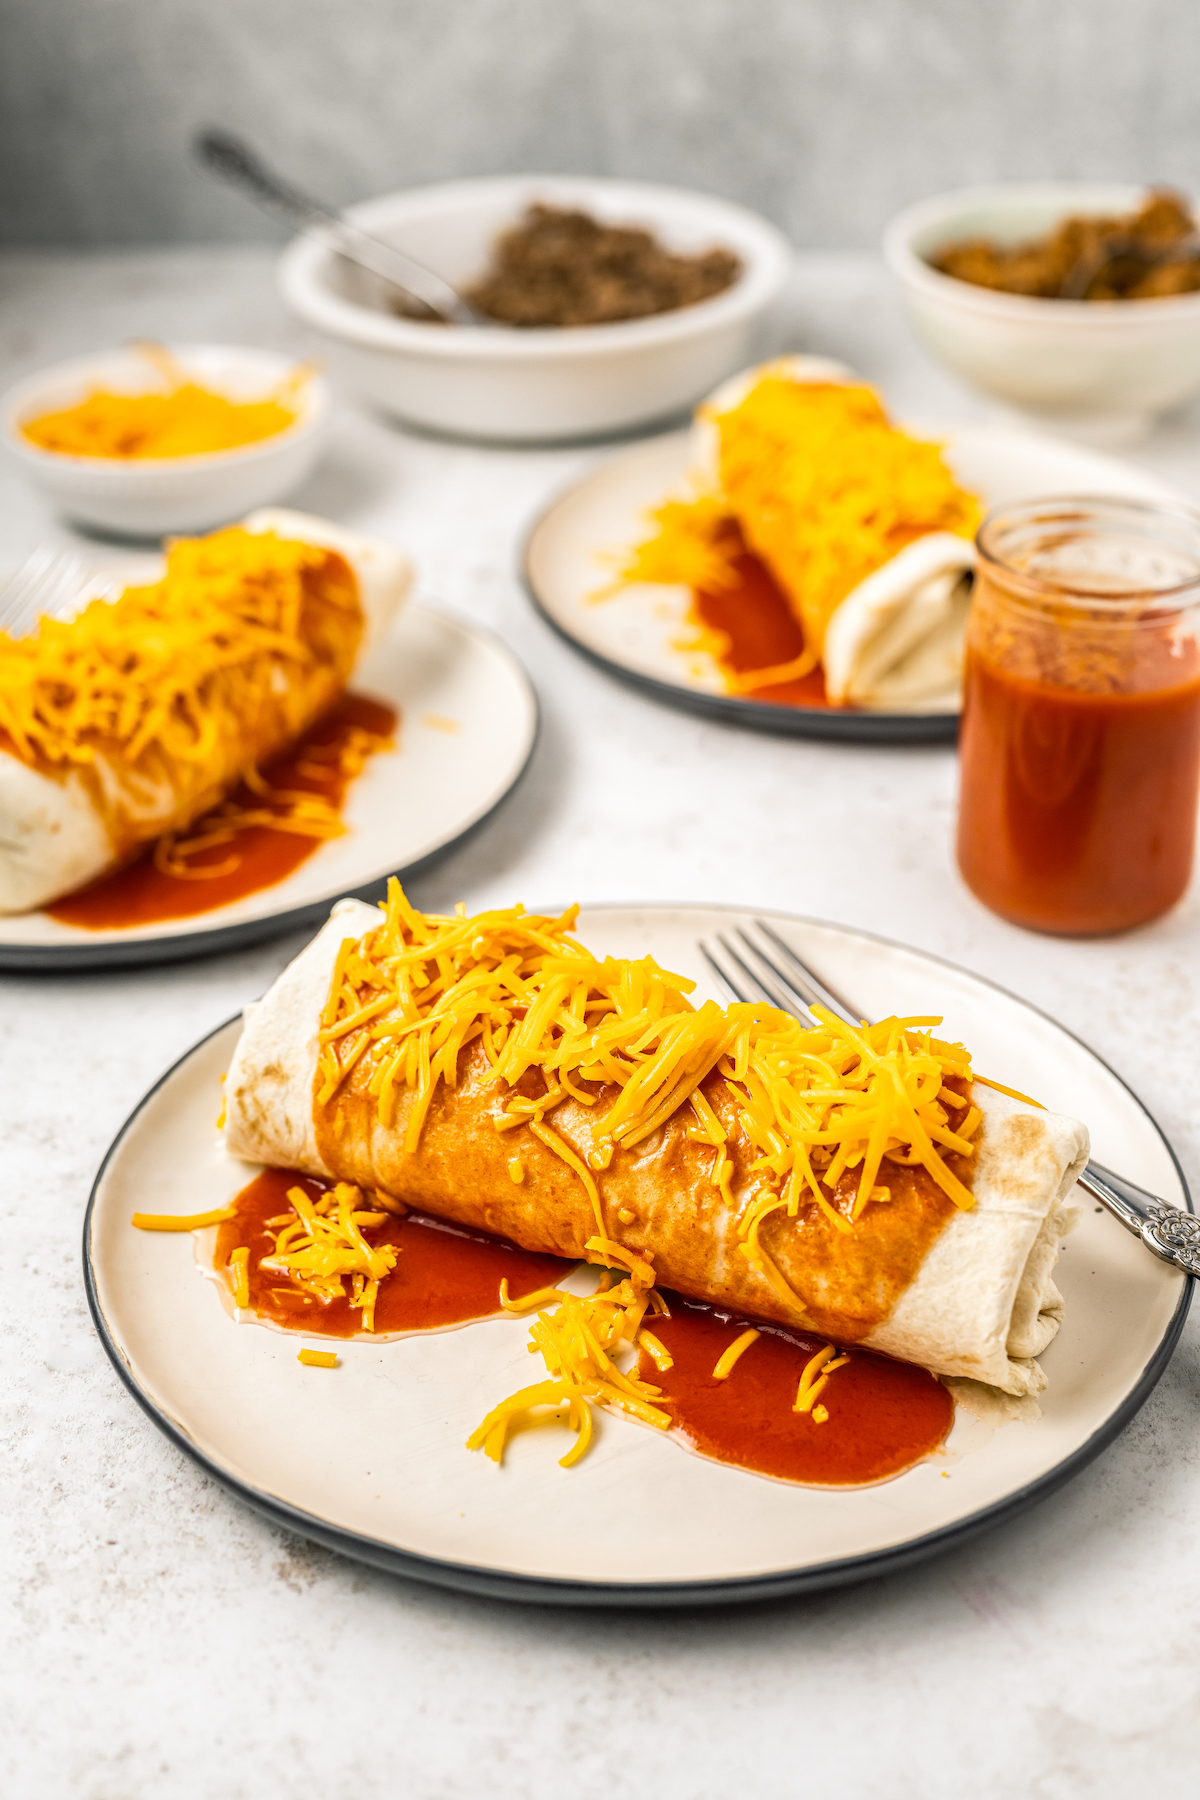 Three Taco Bell enchiritos on plates topped with red sauce and shredded cheddar cheese.